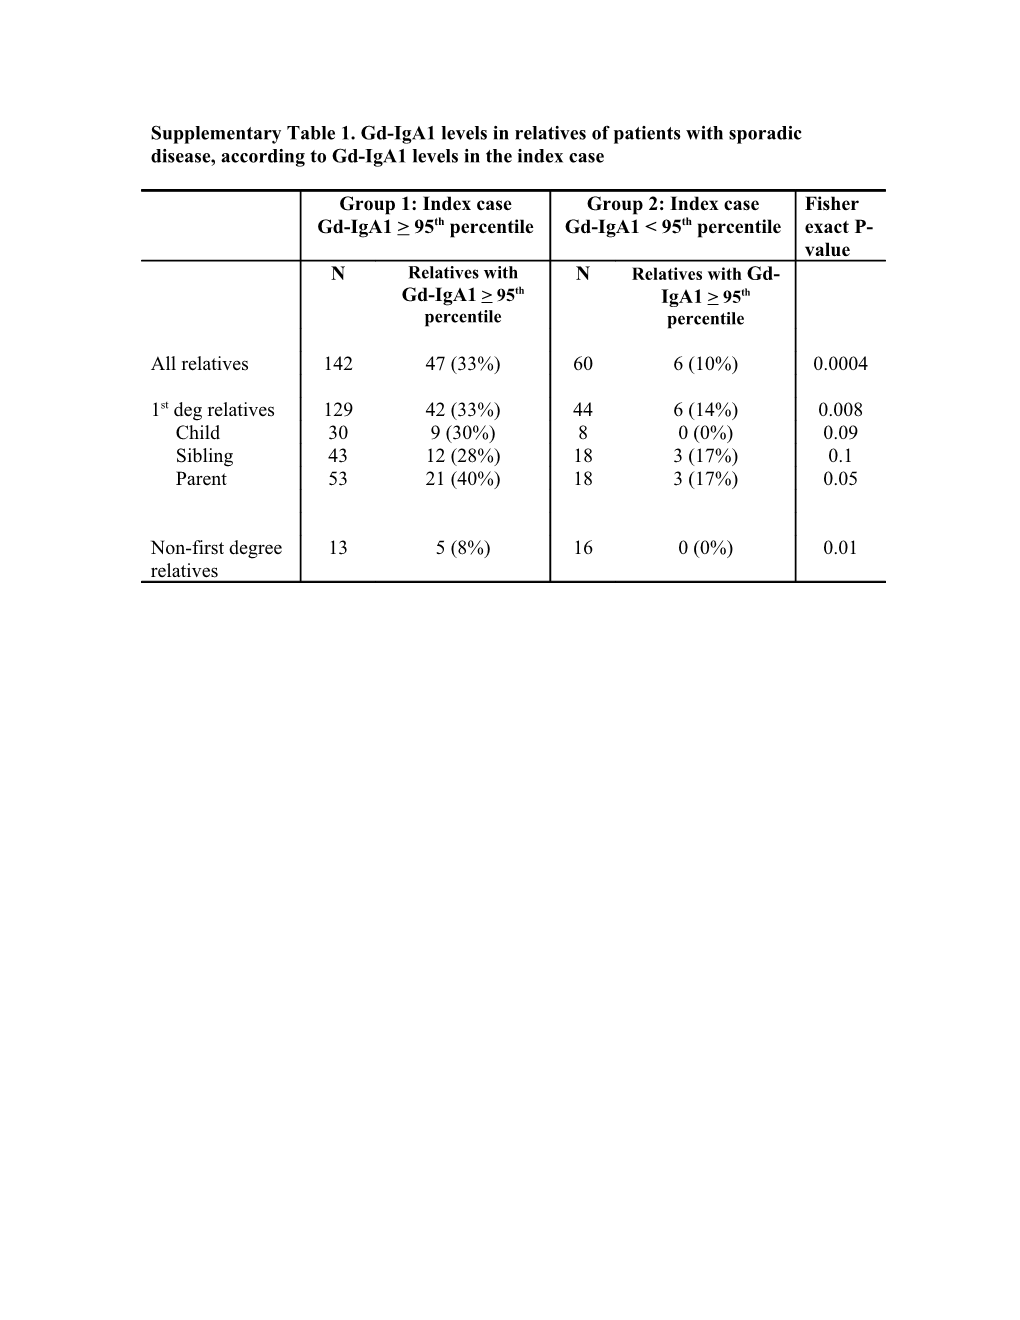 Supplementary Table 1. Gd-Iga1 Levels in Relatives of Patients with Sporadic Disease